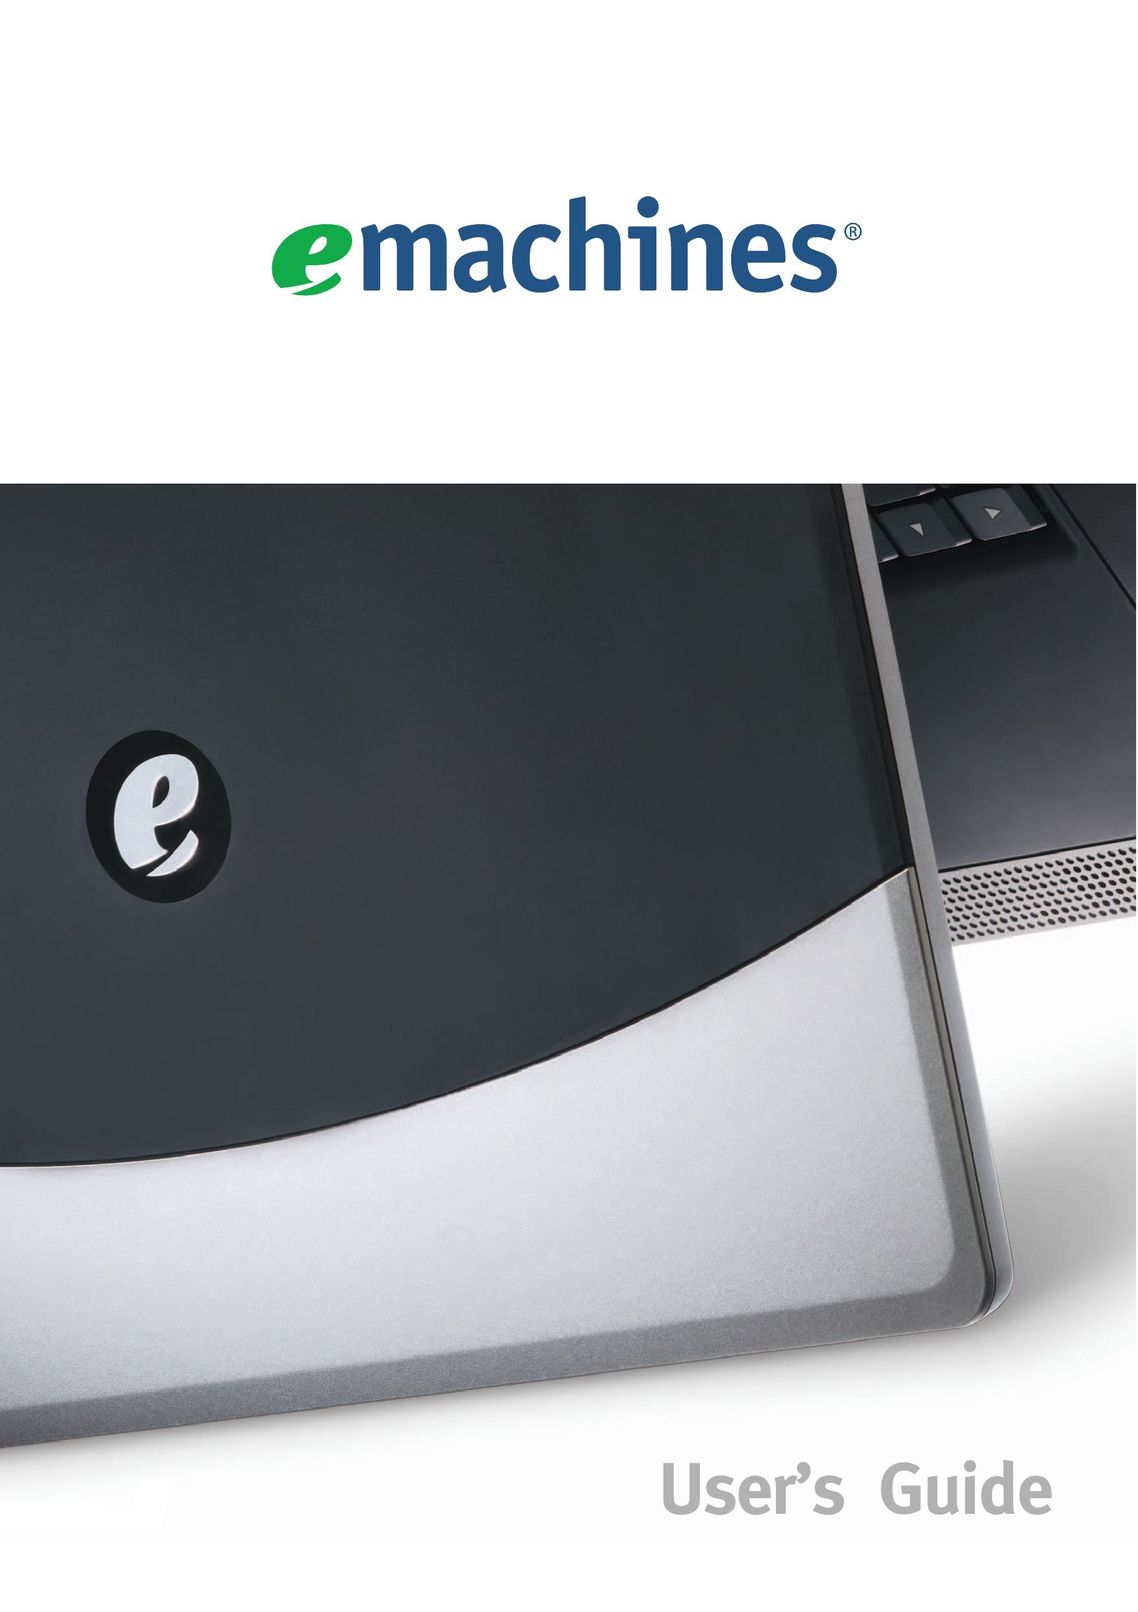 eMachines AAFW53700001K0 Laptop User Manual